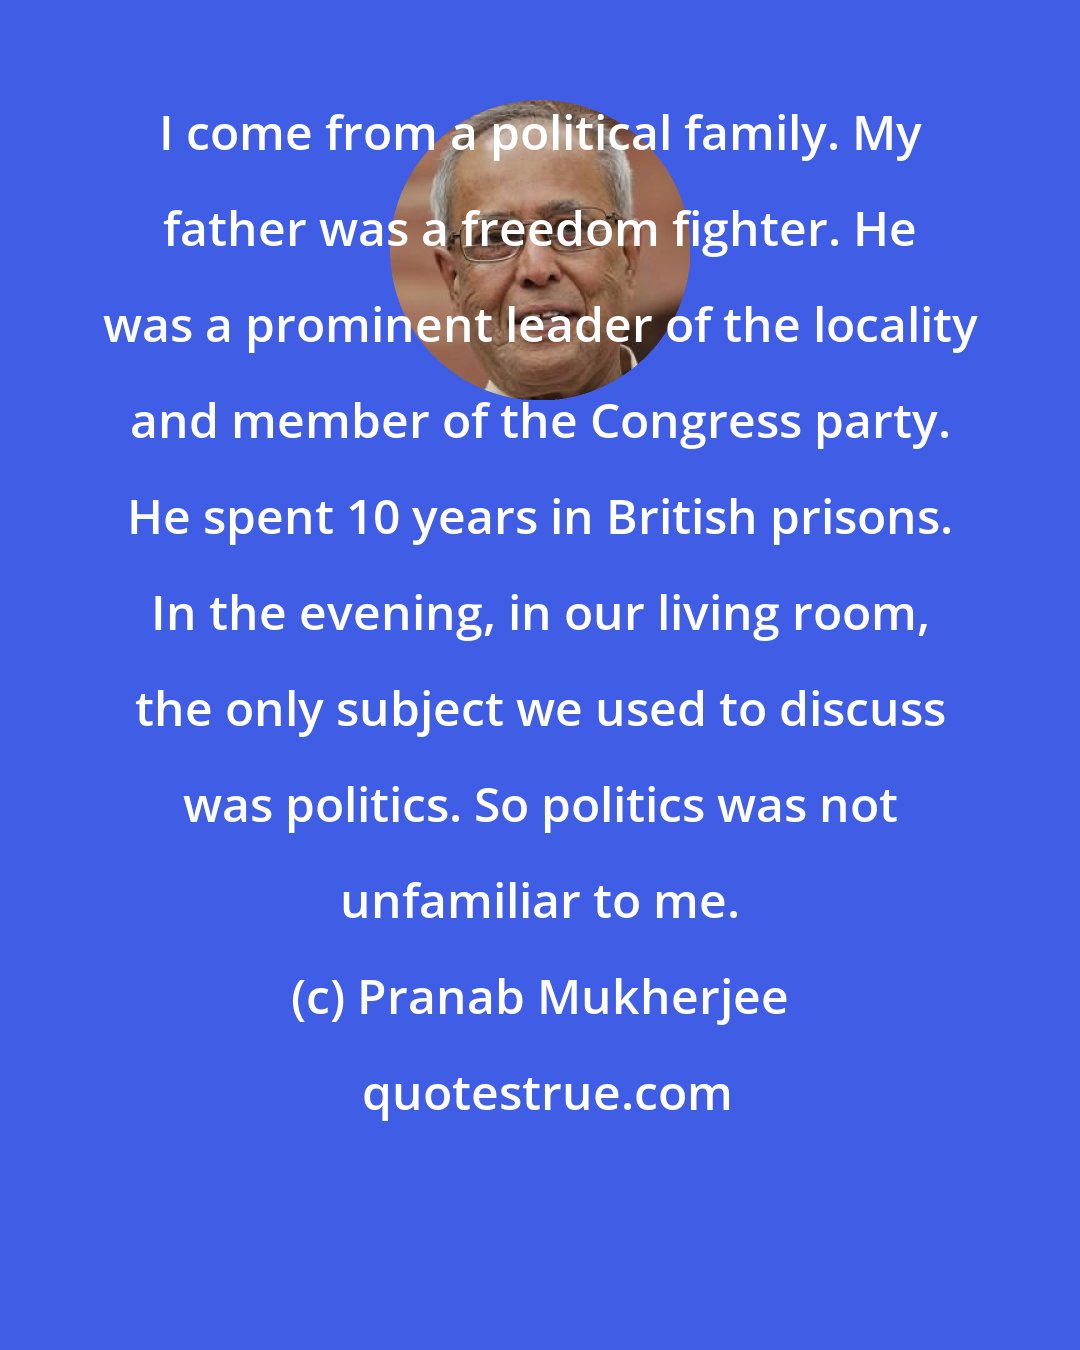 Pranab Mukherjee: I come from a political family. My father was a freedom fighter. He was a prominent leader of the locality and member of the Congress party. He spent 10 years in British prisons. In the evening, in our living room, the only subject we used to discuss was politics. So politics was not unfamiliar to me.